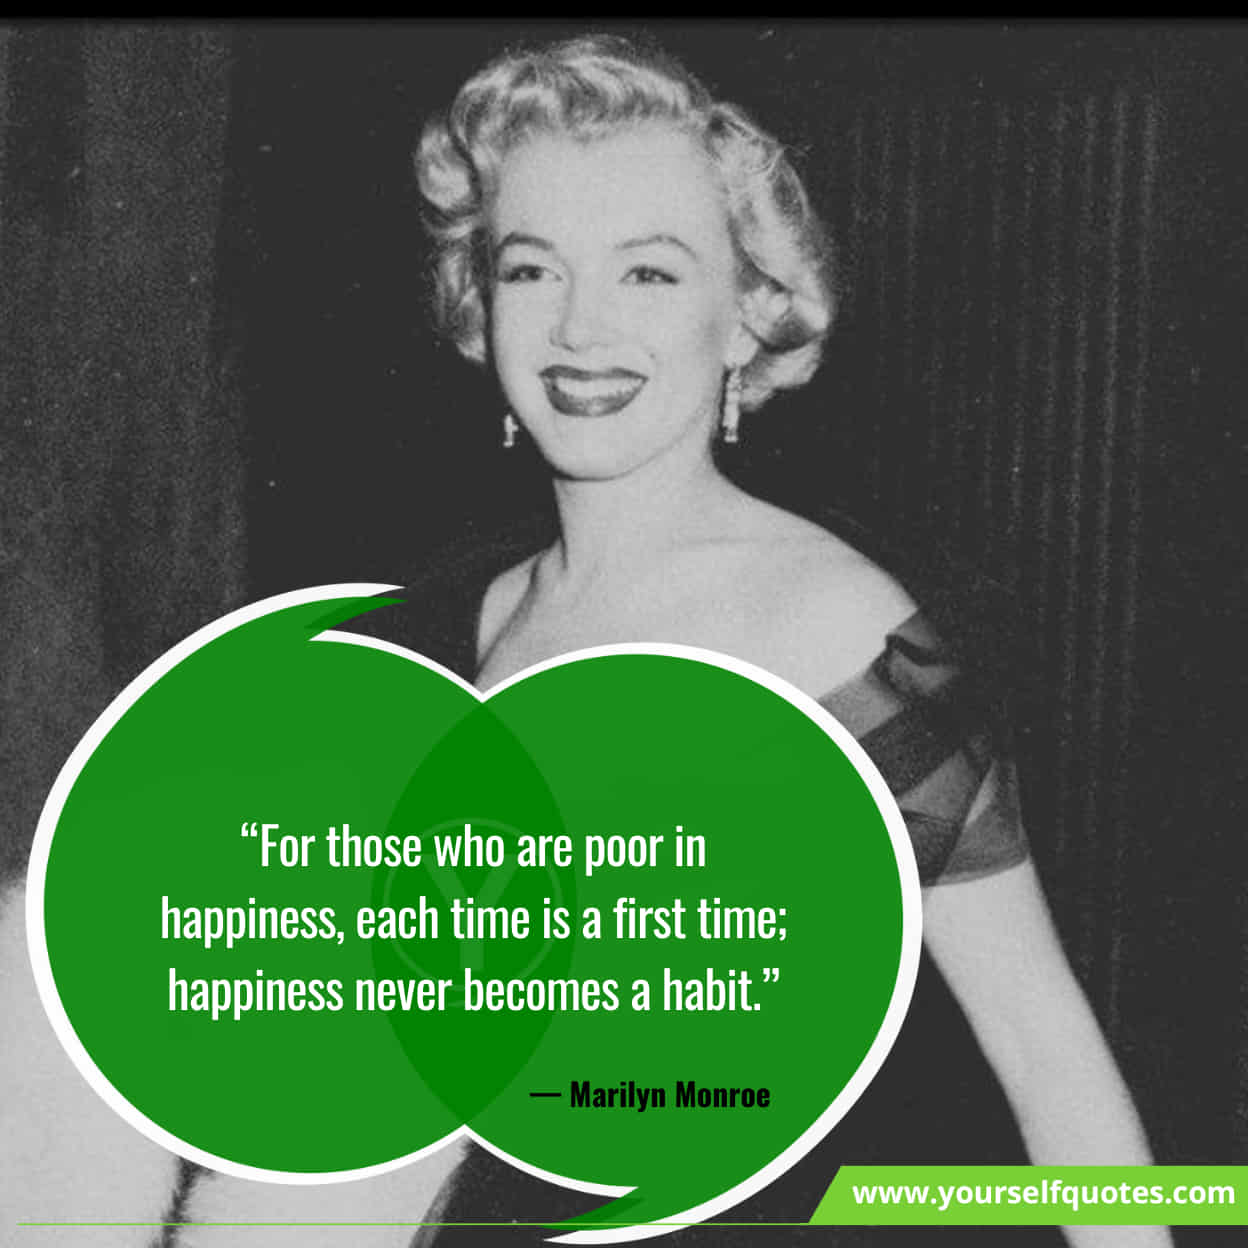 Famous Quotes By Marilyn Monroe